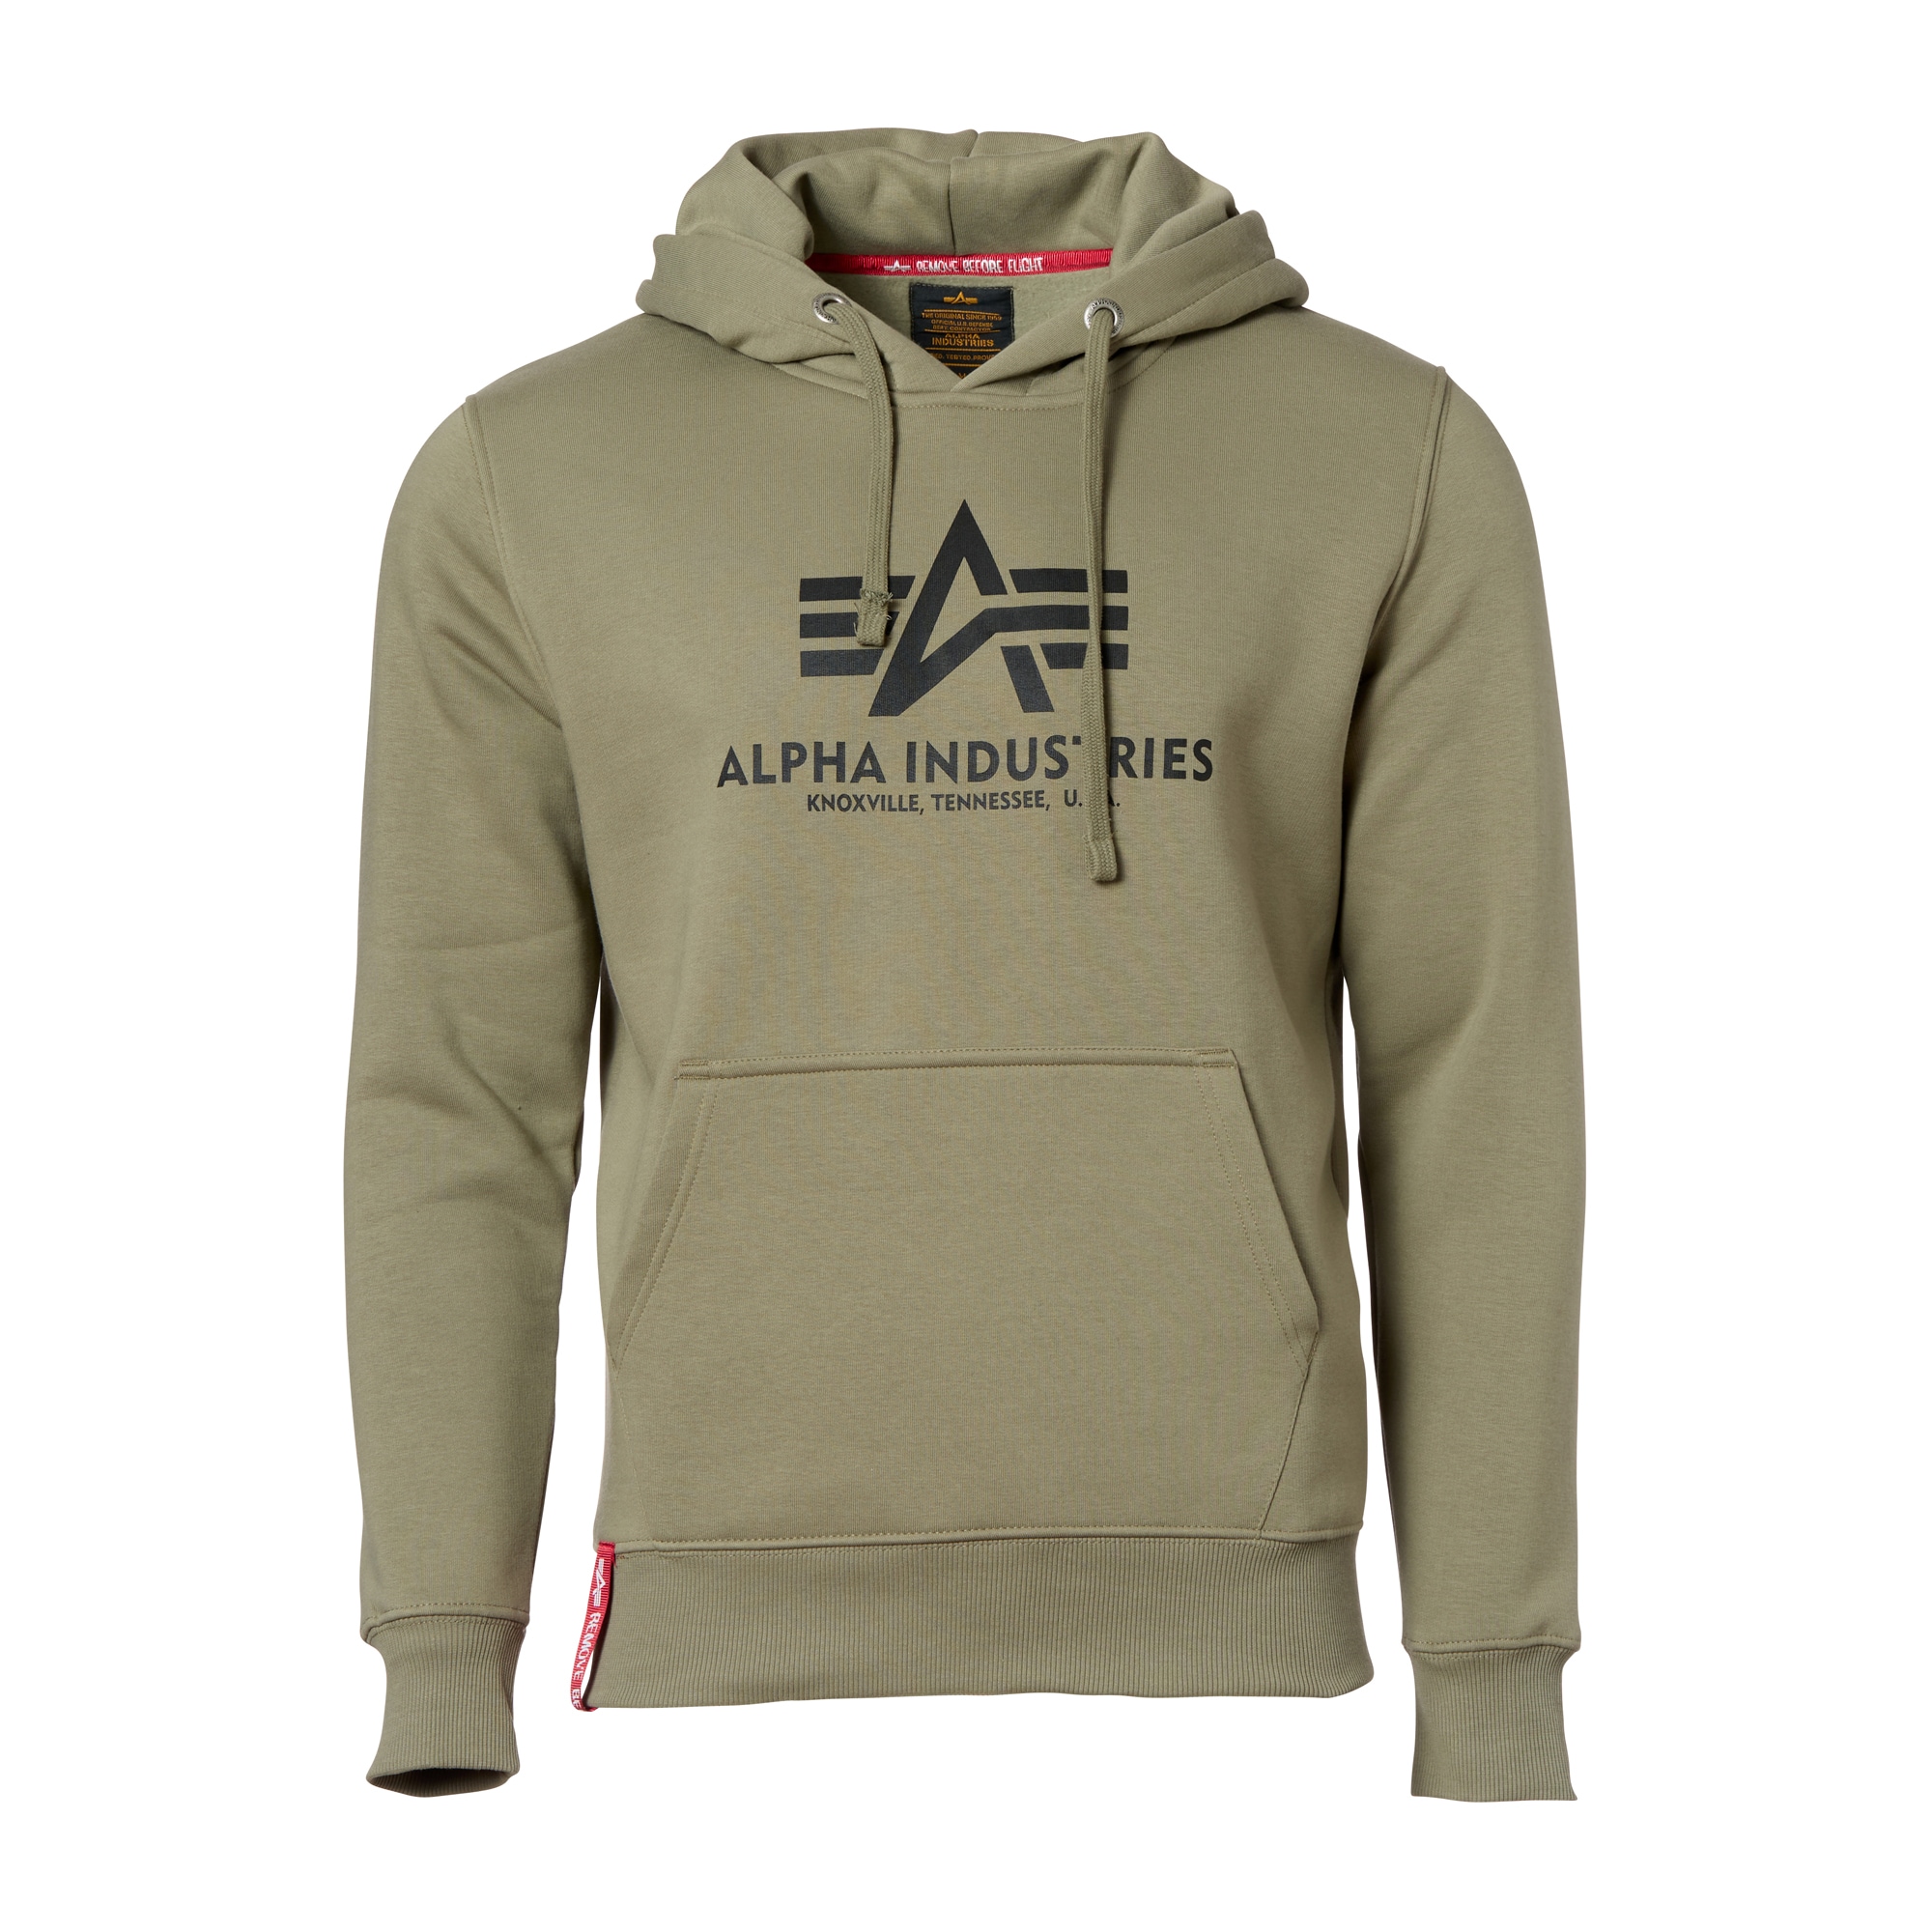 Alpha ASM Basic olive Hoodie by Purchase the Industries Pullover